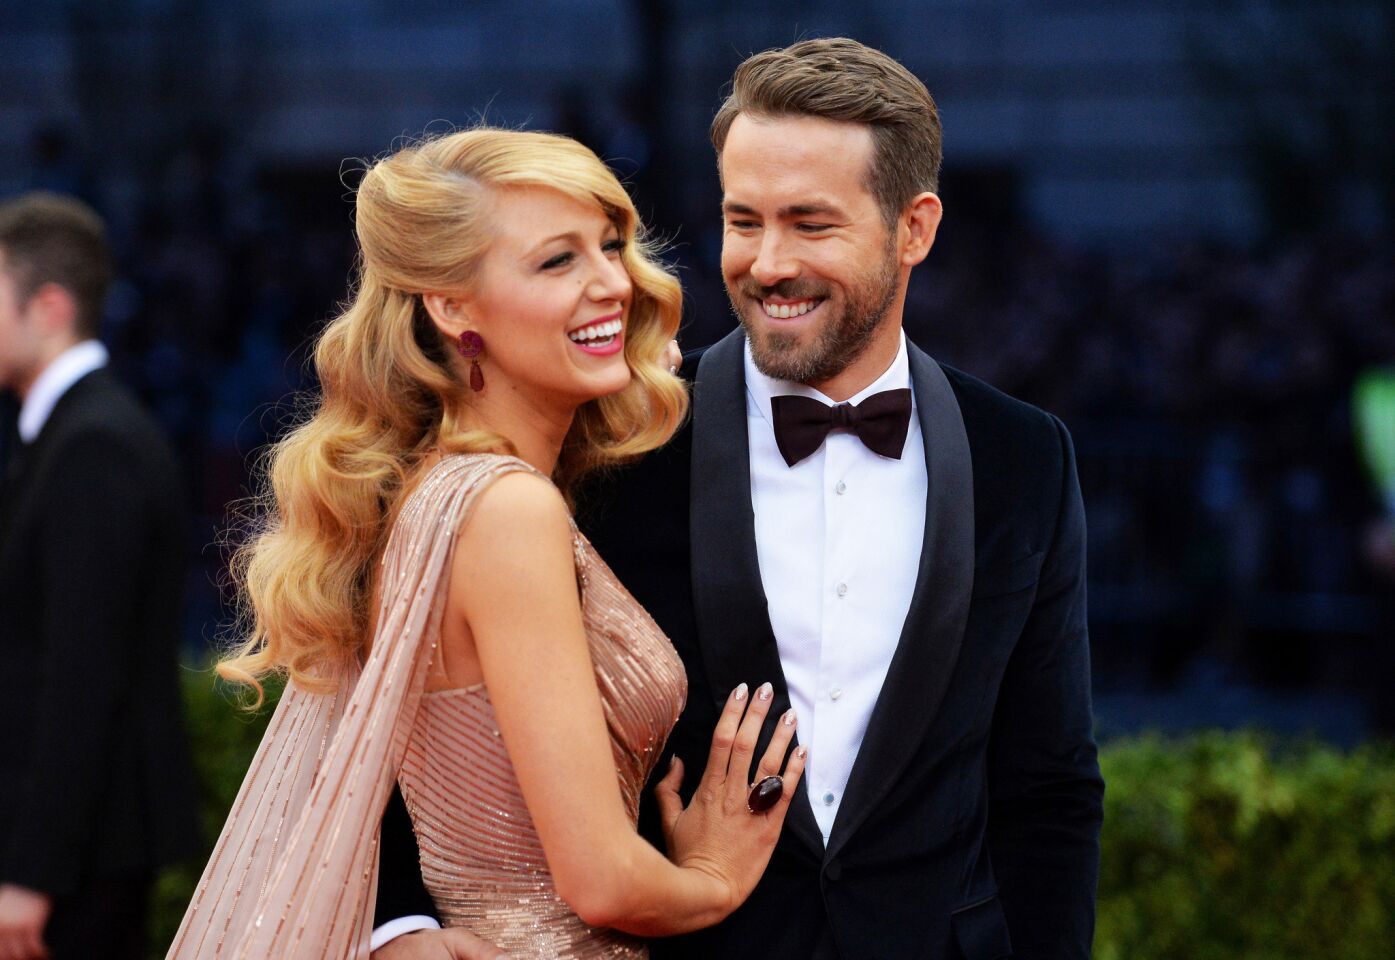 Blake Lively and husband Ryan Reynolds better get ready for sleepless nights. The two welcomed their first child together, a daughter. No word yet on the baby's name.